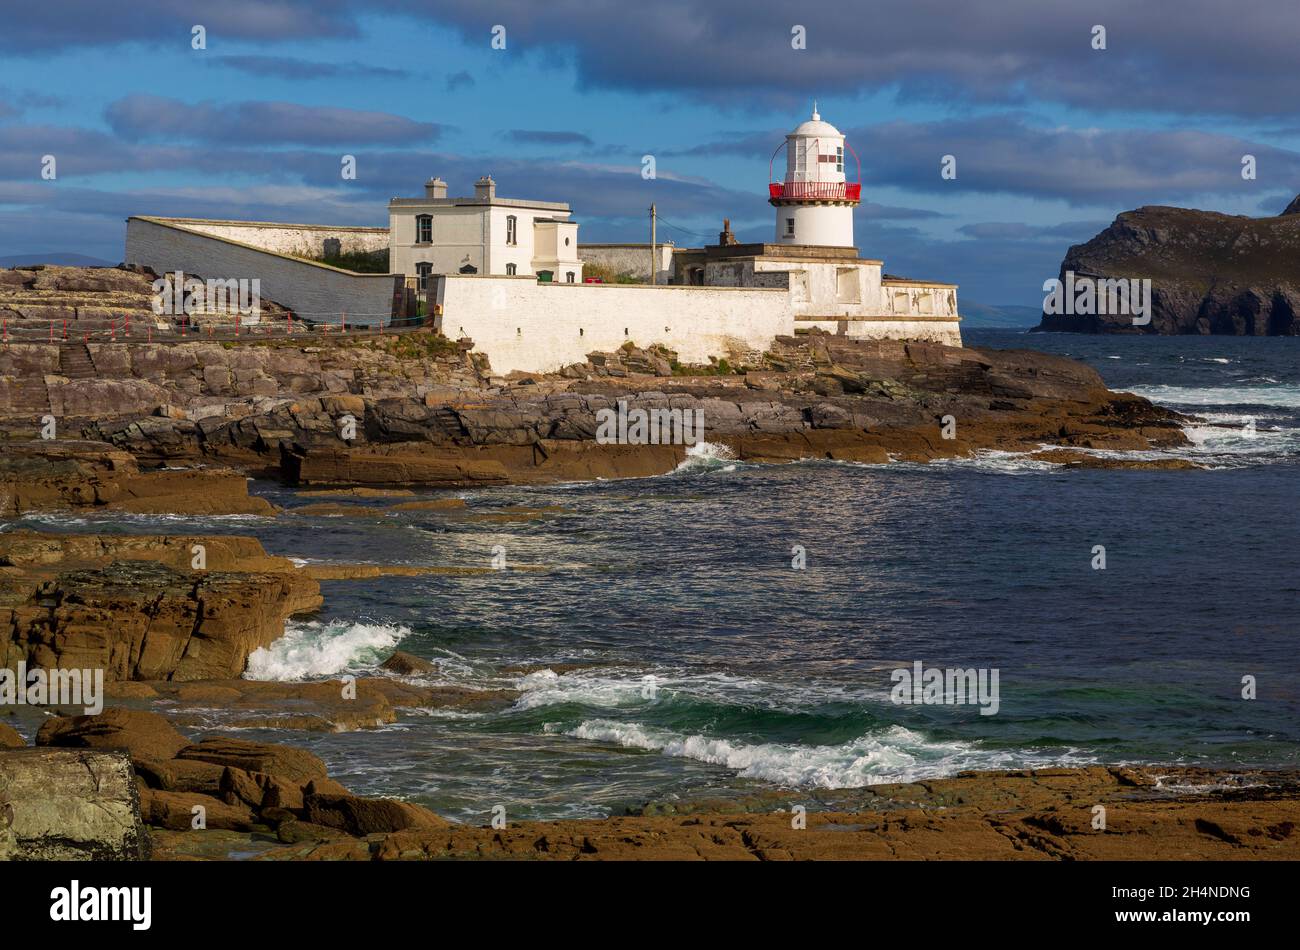 Cromwell Point Lighthouse, Valentia Isalnd, County Kerry, Irland Stockfoto